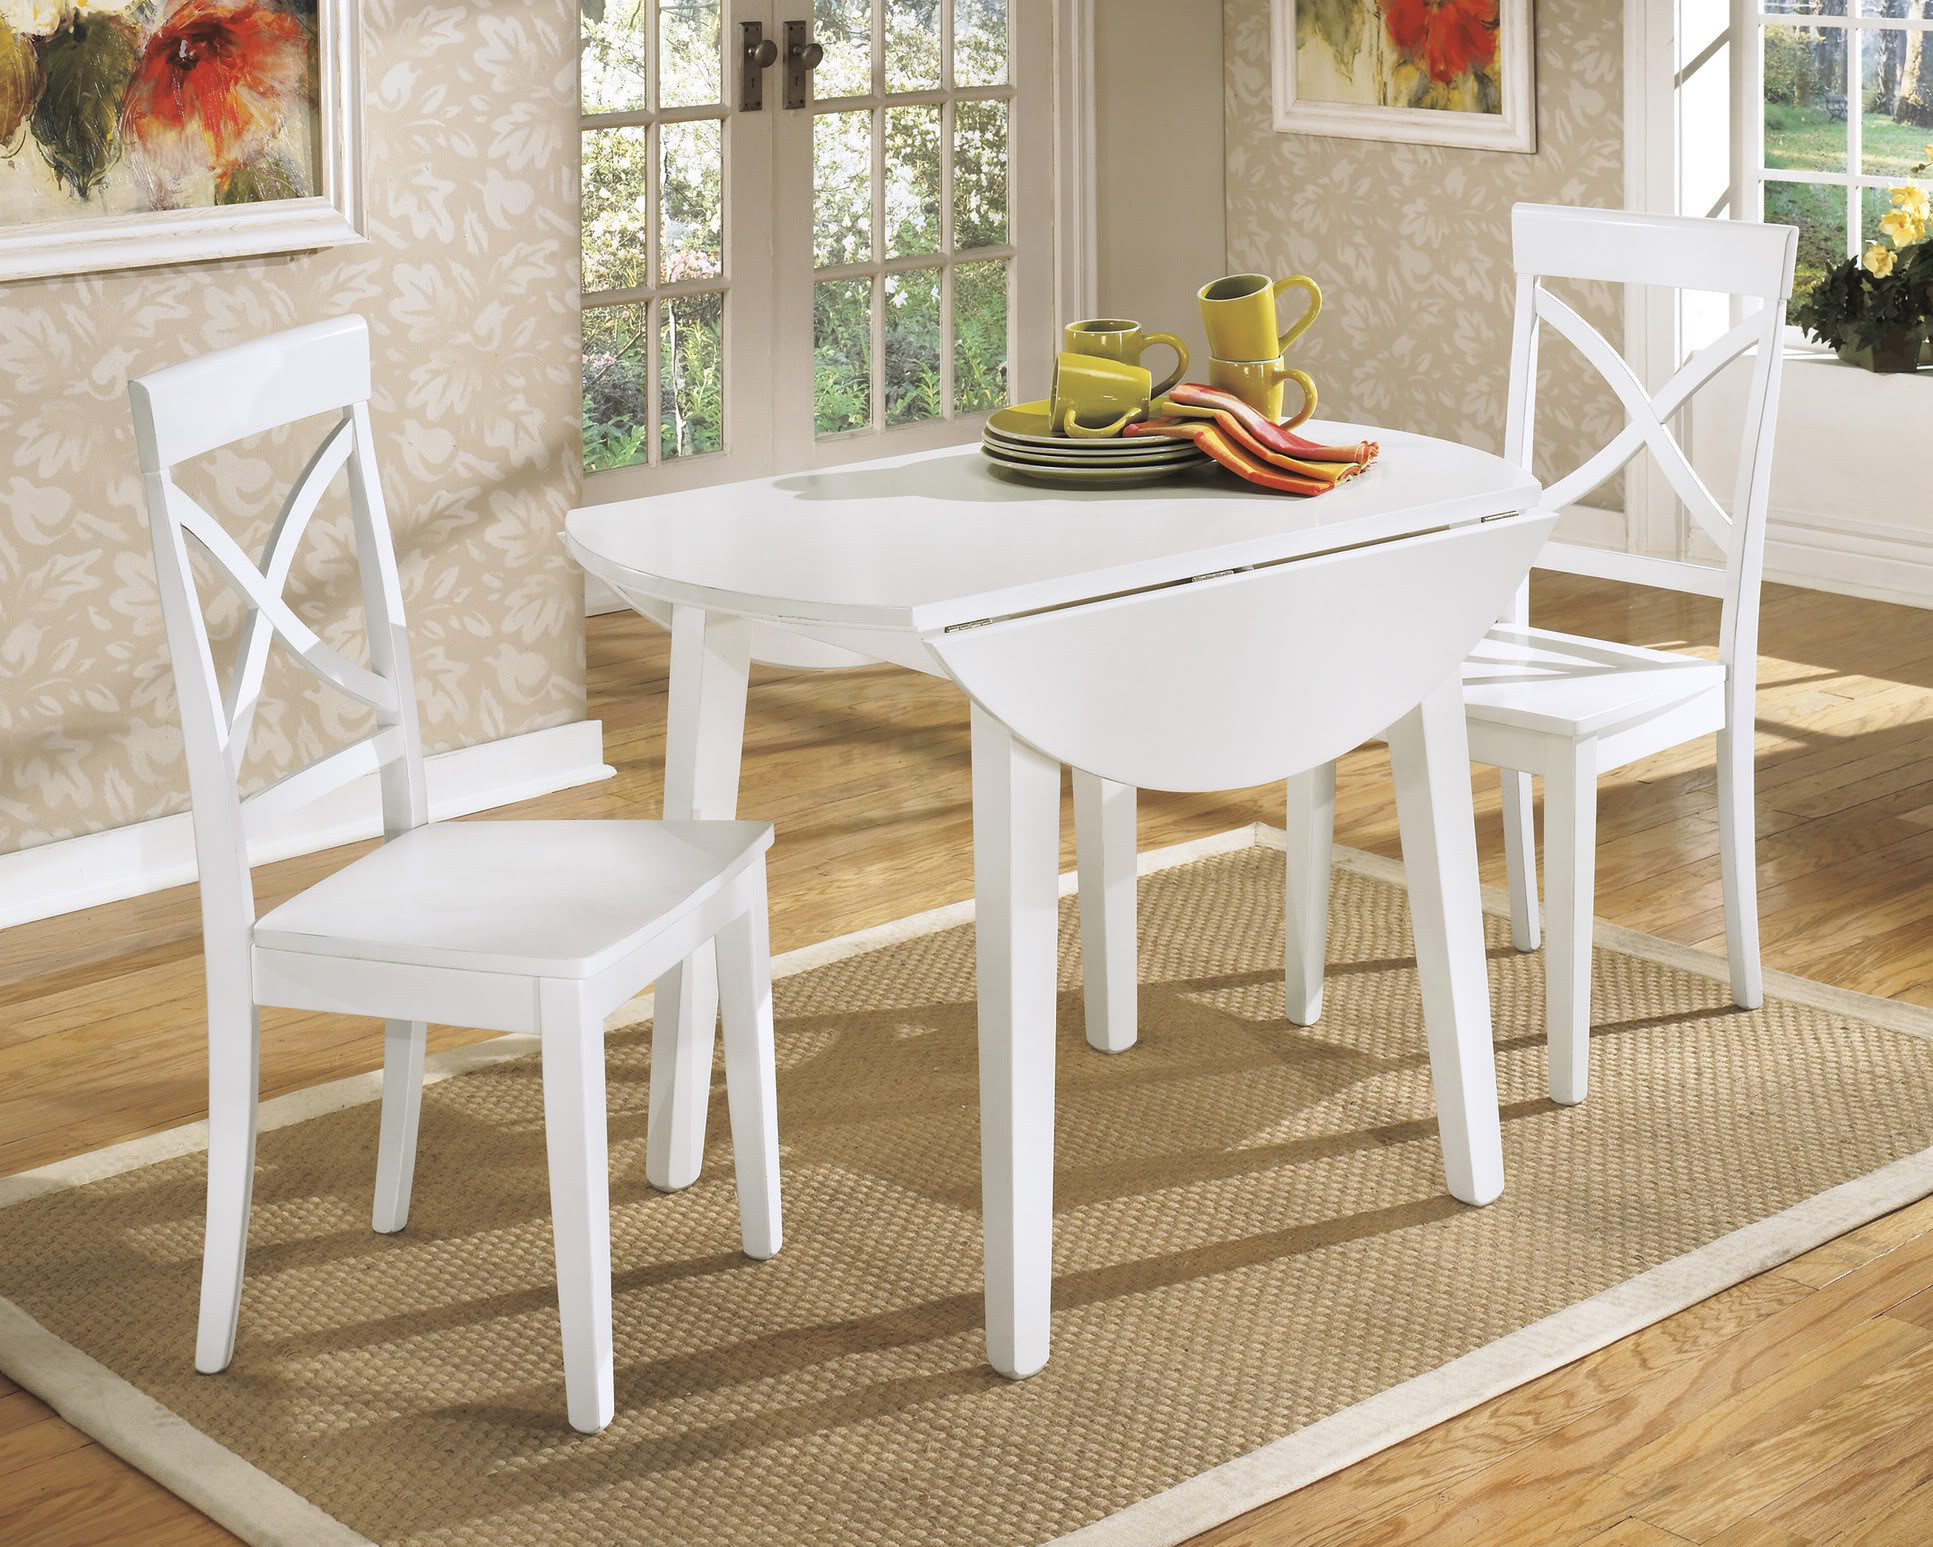 Small White Kitchen Tables
 White Round Kitchen Table and Chairs Design